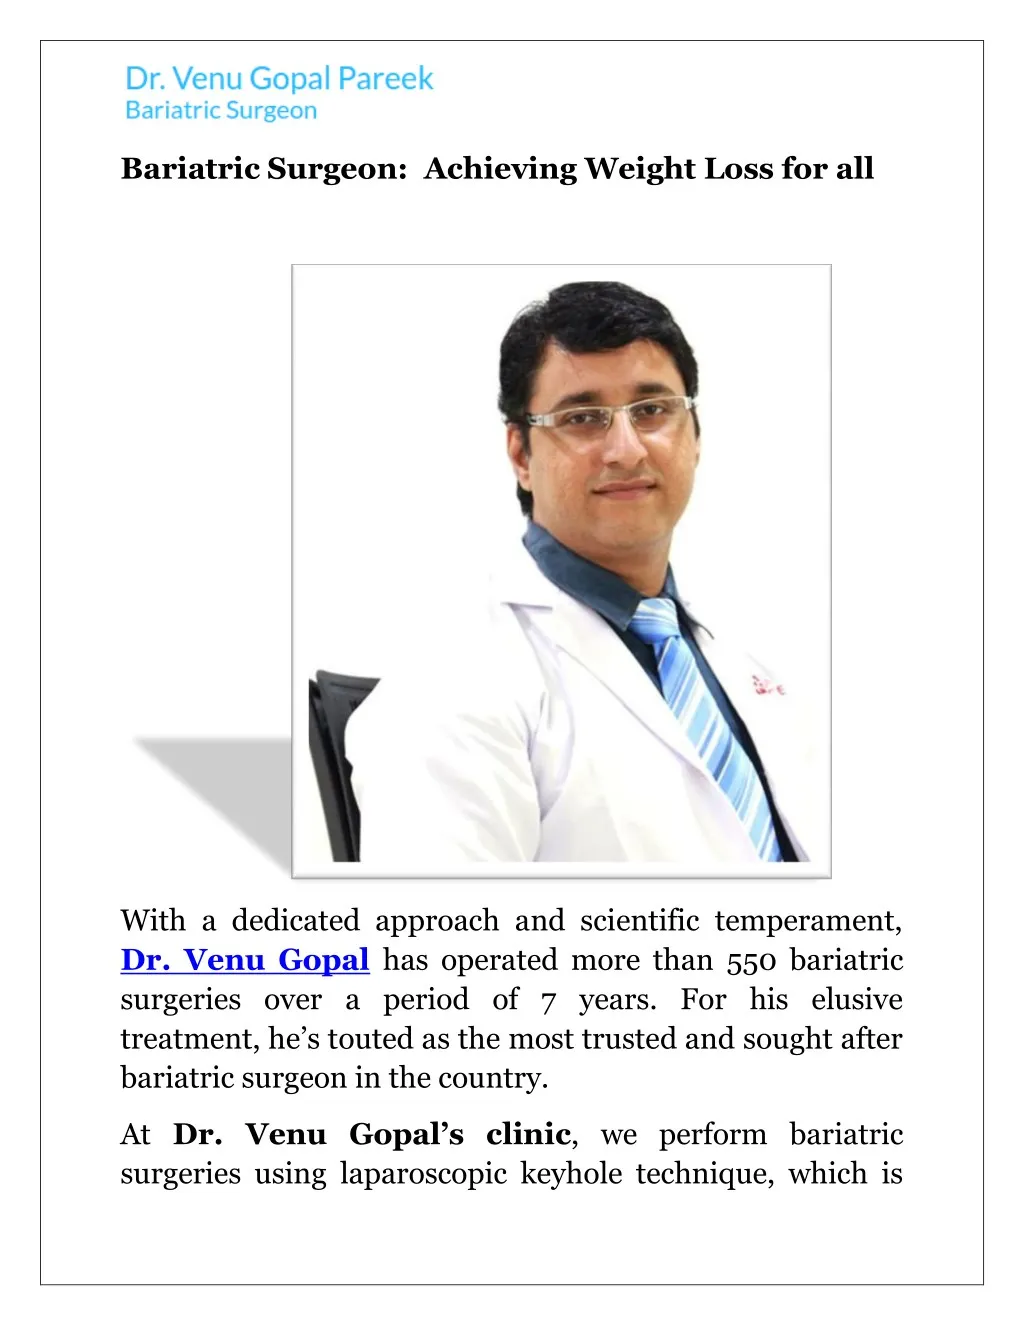 bariatric surgeon achieving weight loss for all